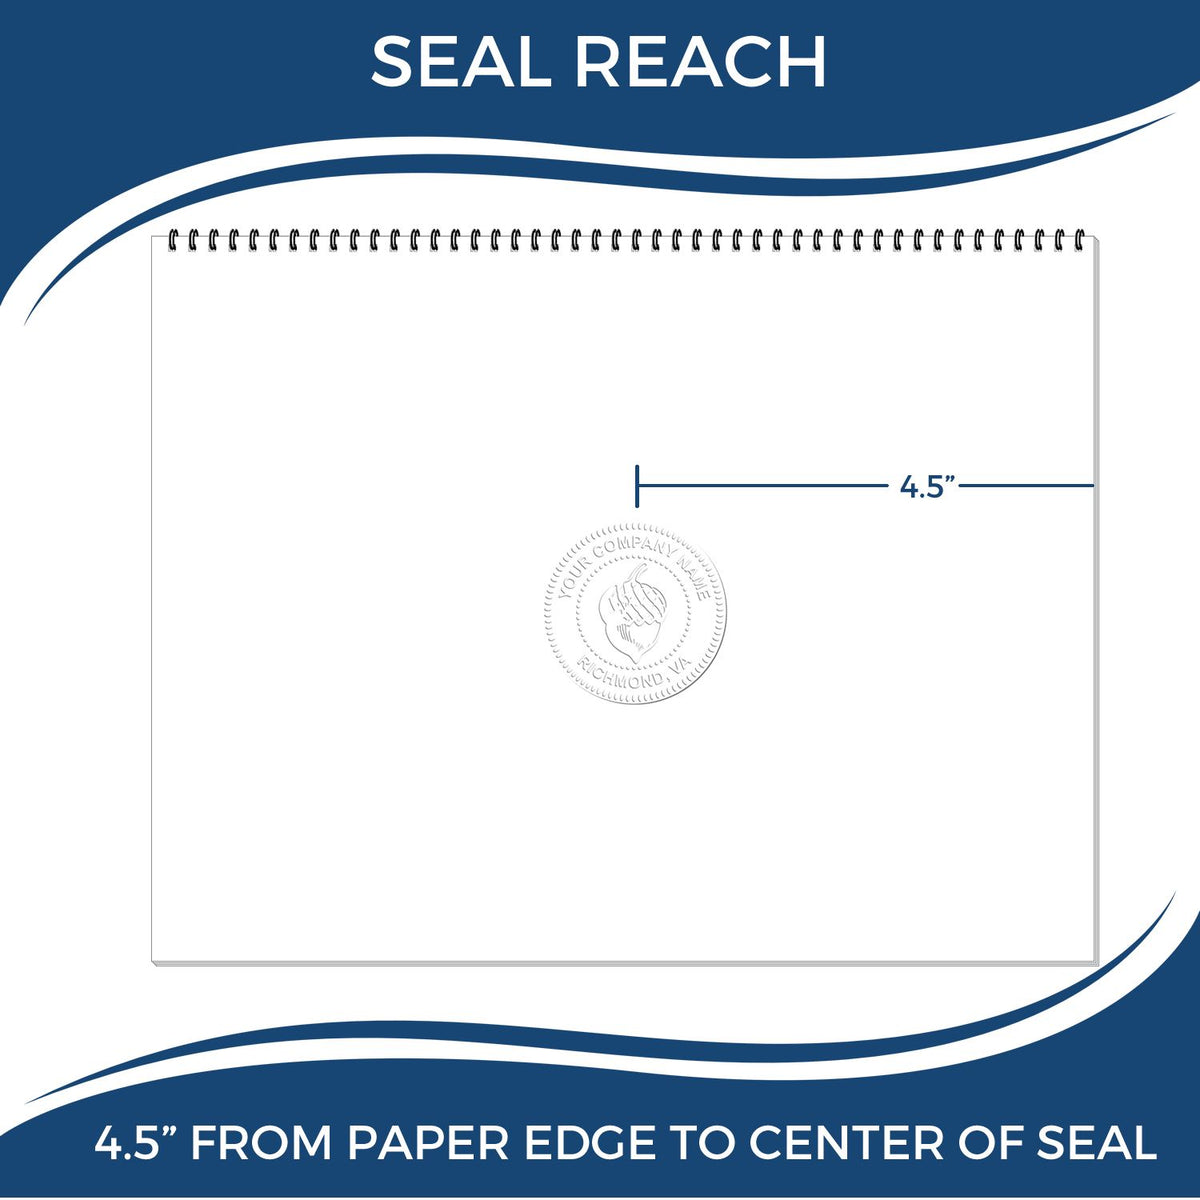 An infographic showing the seal reach which is represented by a ruler and a miniature seal image of the State of Kansas Extended Long Reach Geologist Seal